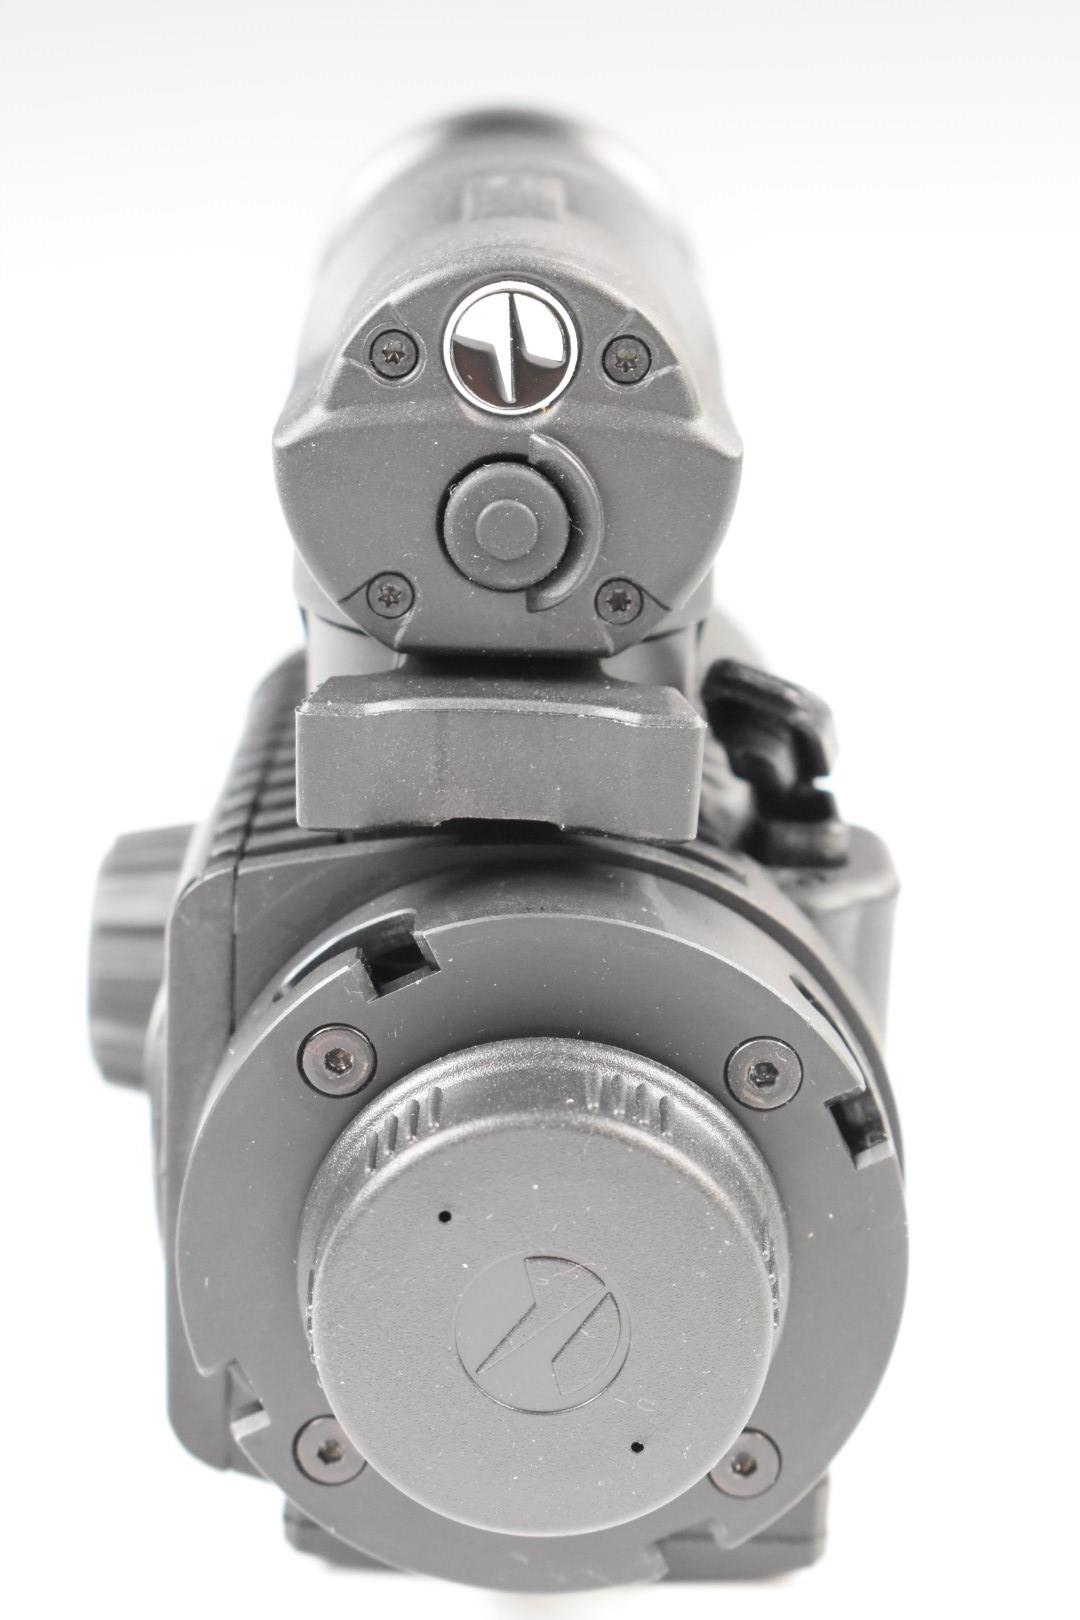 Pulsar Forward F455 digital night vision attachment to suit air rifle or similar scope, in - Image 9 of 10